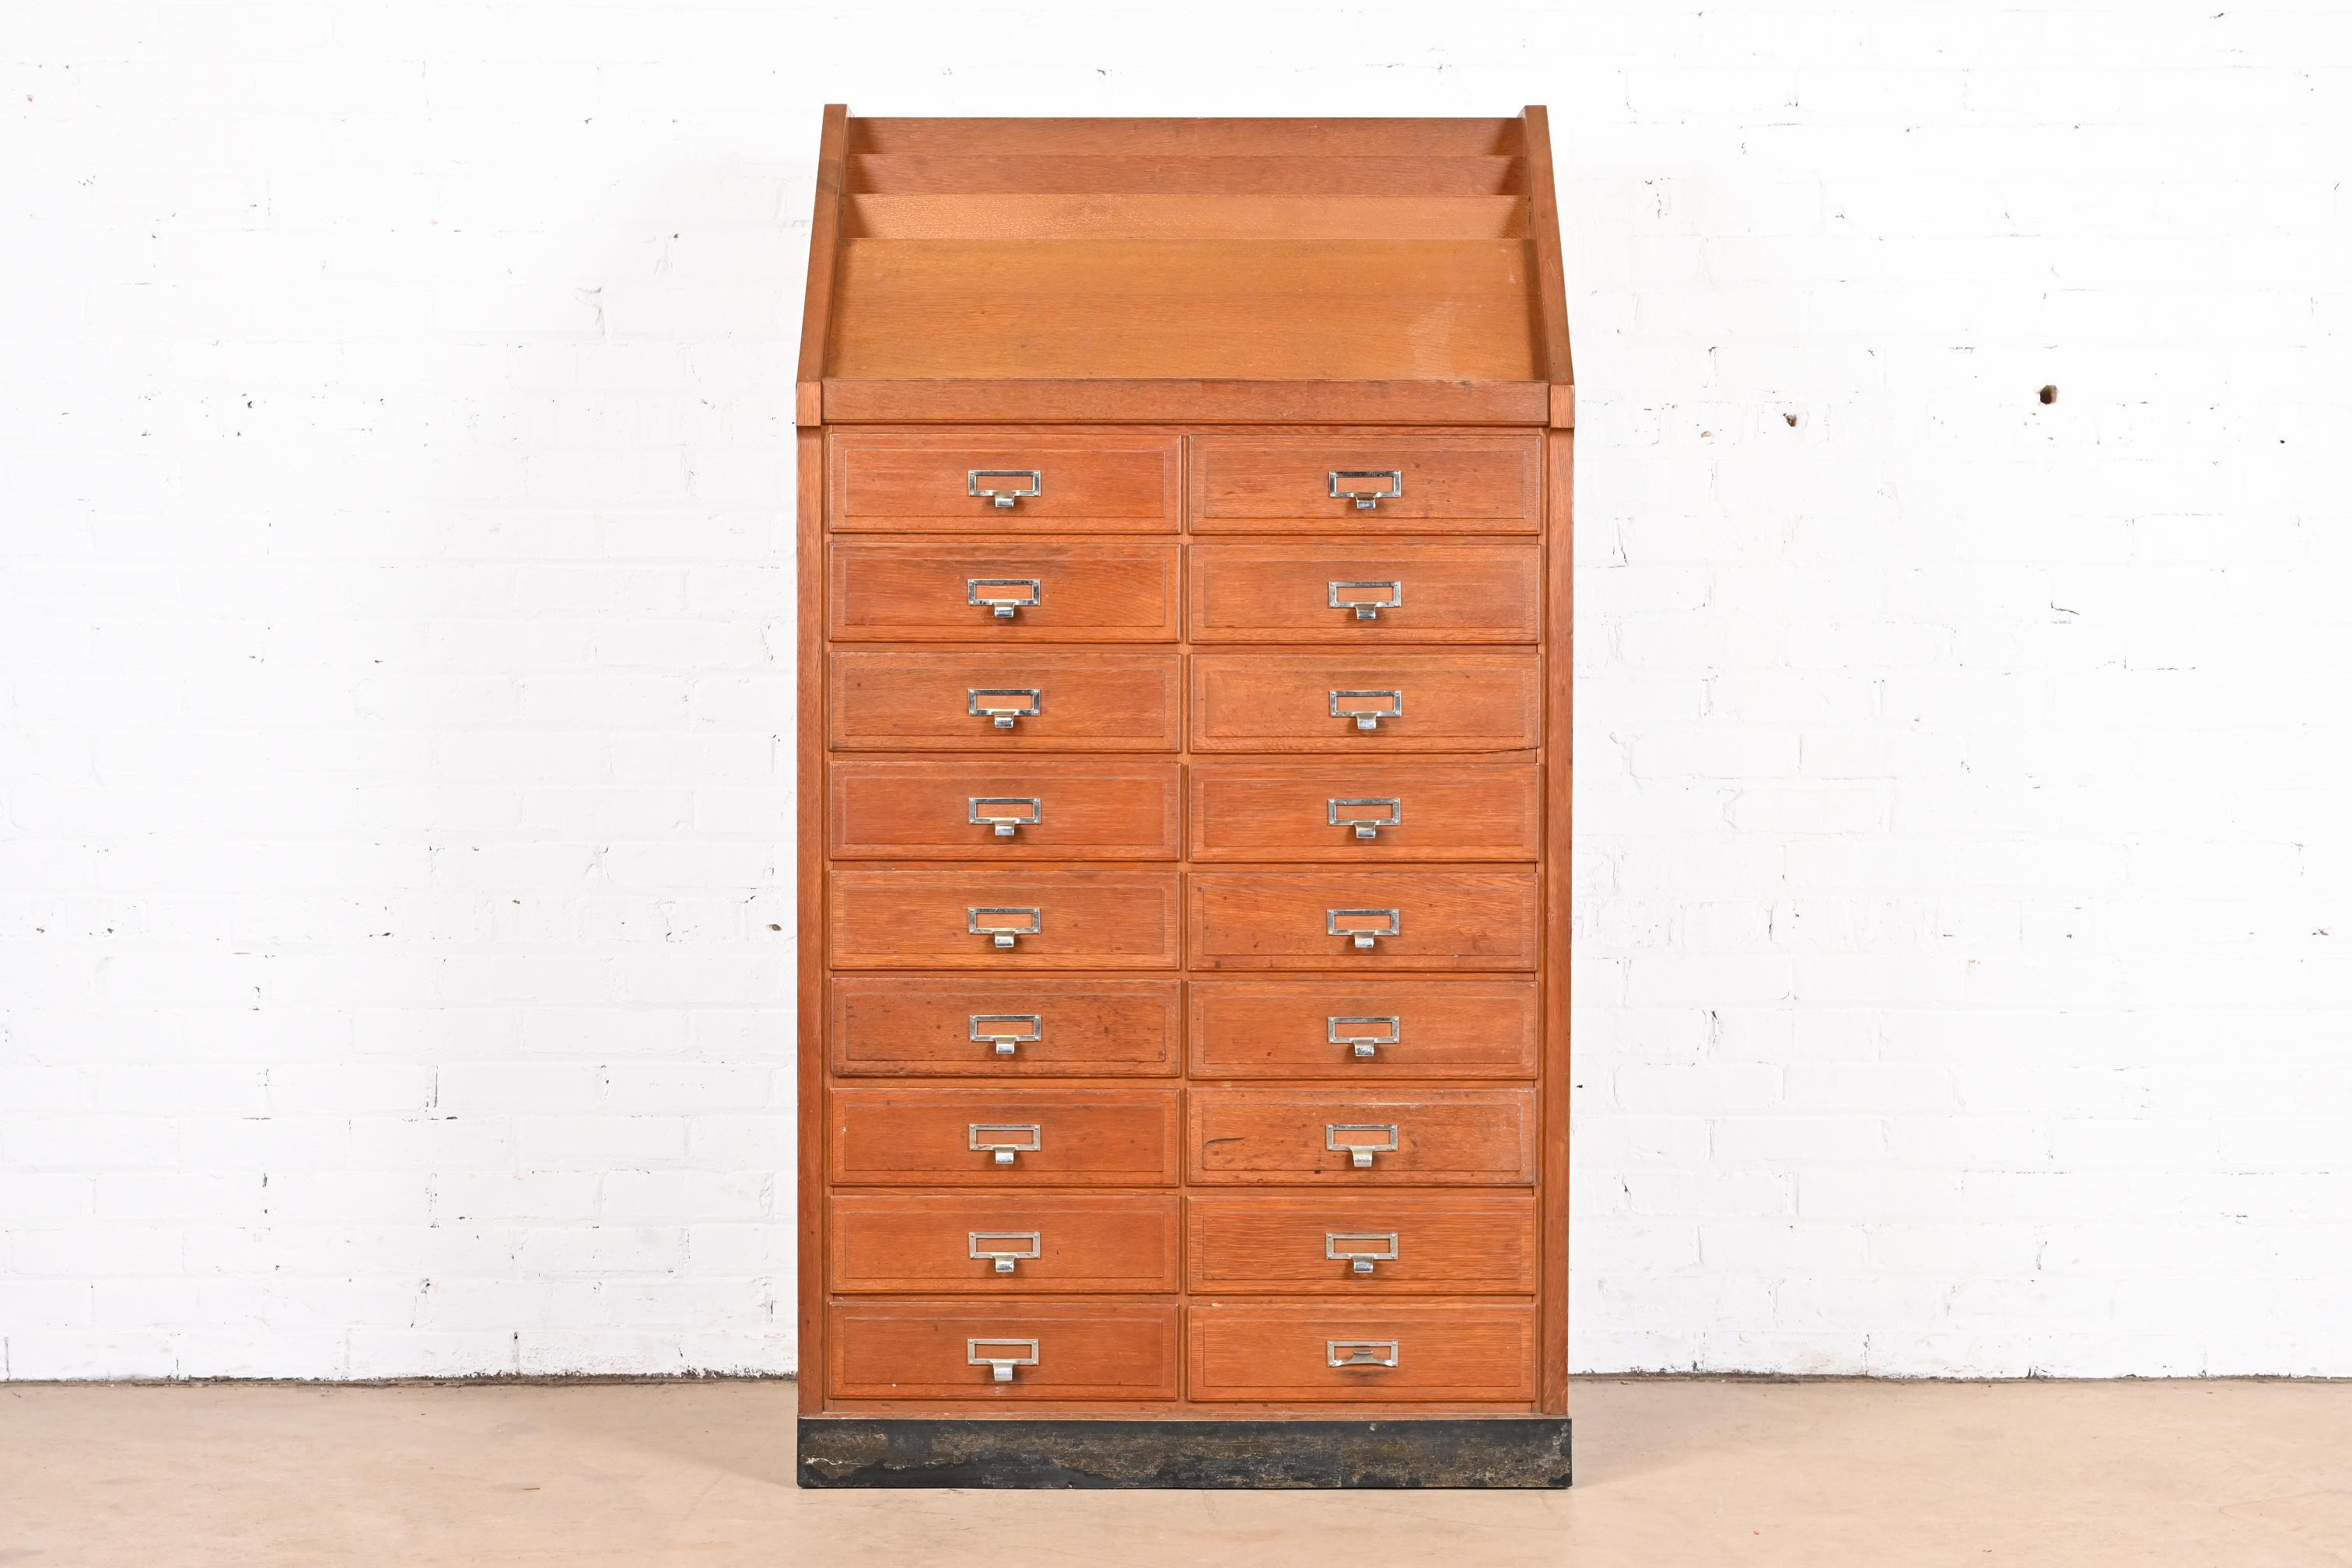 A fantastic oak 18-drawer library card catalog or file cabinet with book or magazine rack on top

USA, Mid-20th Century

Oak, with original metal hardware.

Measures: 33.25